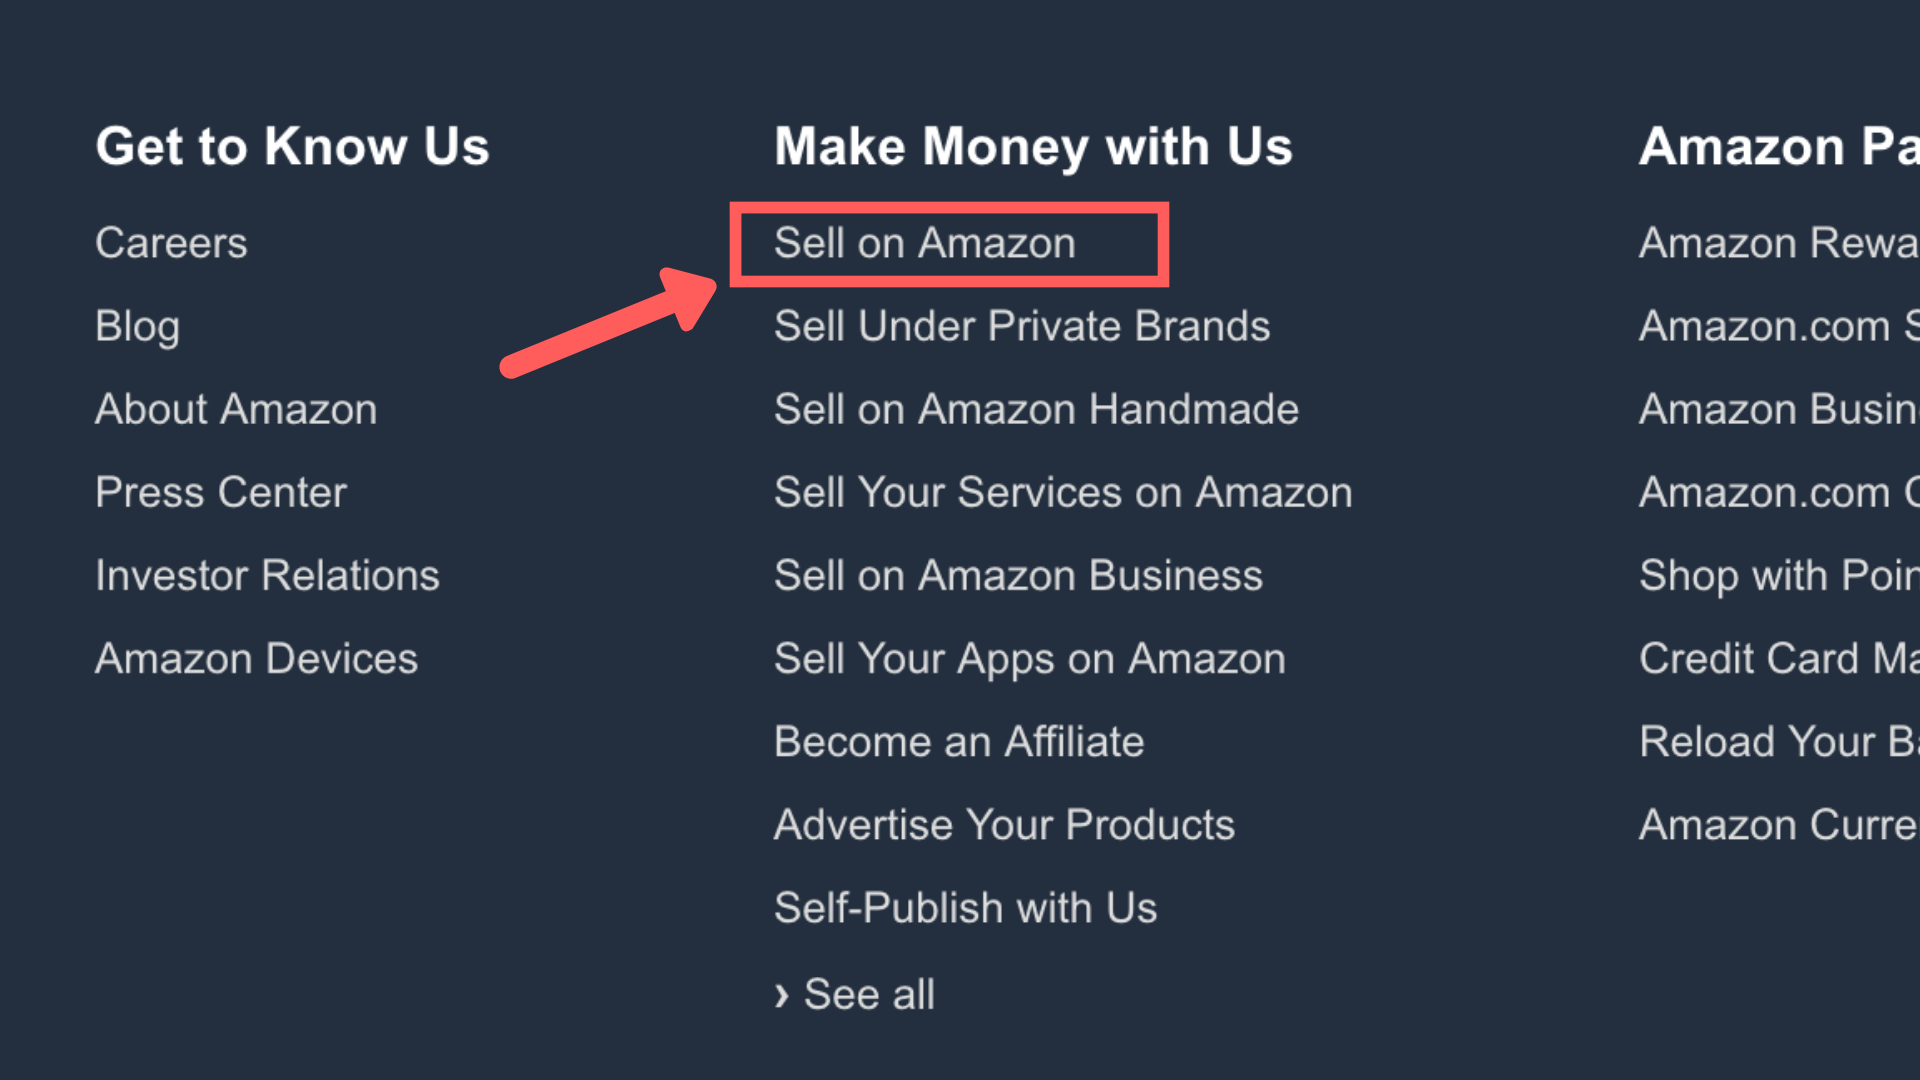 sell on Amazon is on the footer of their website